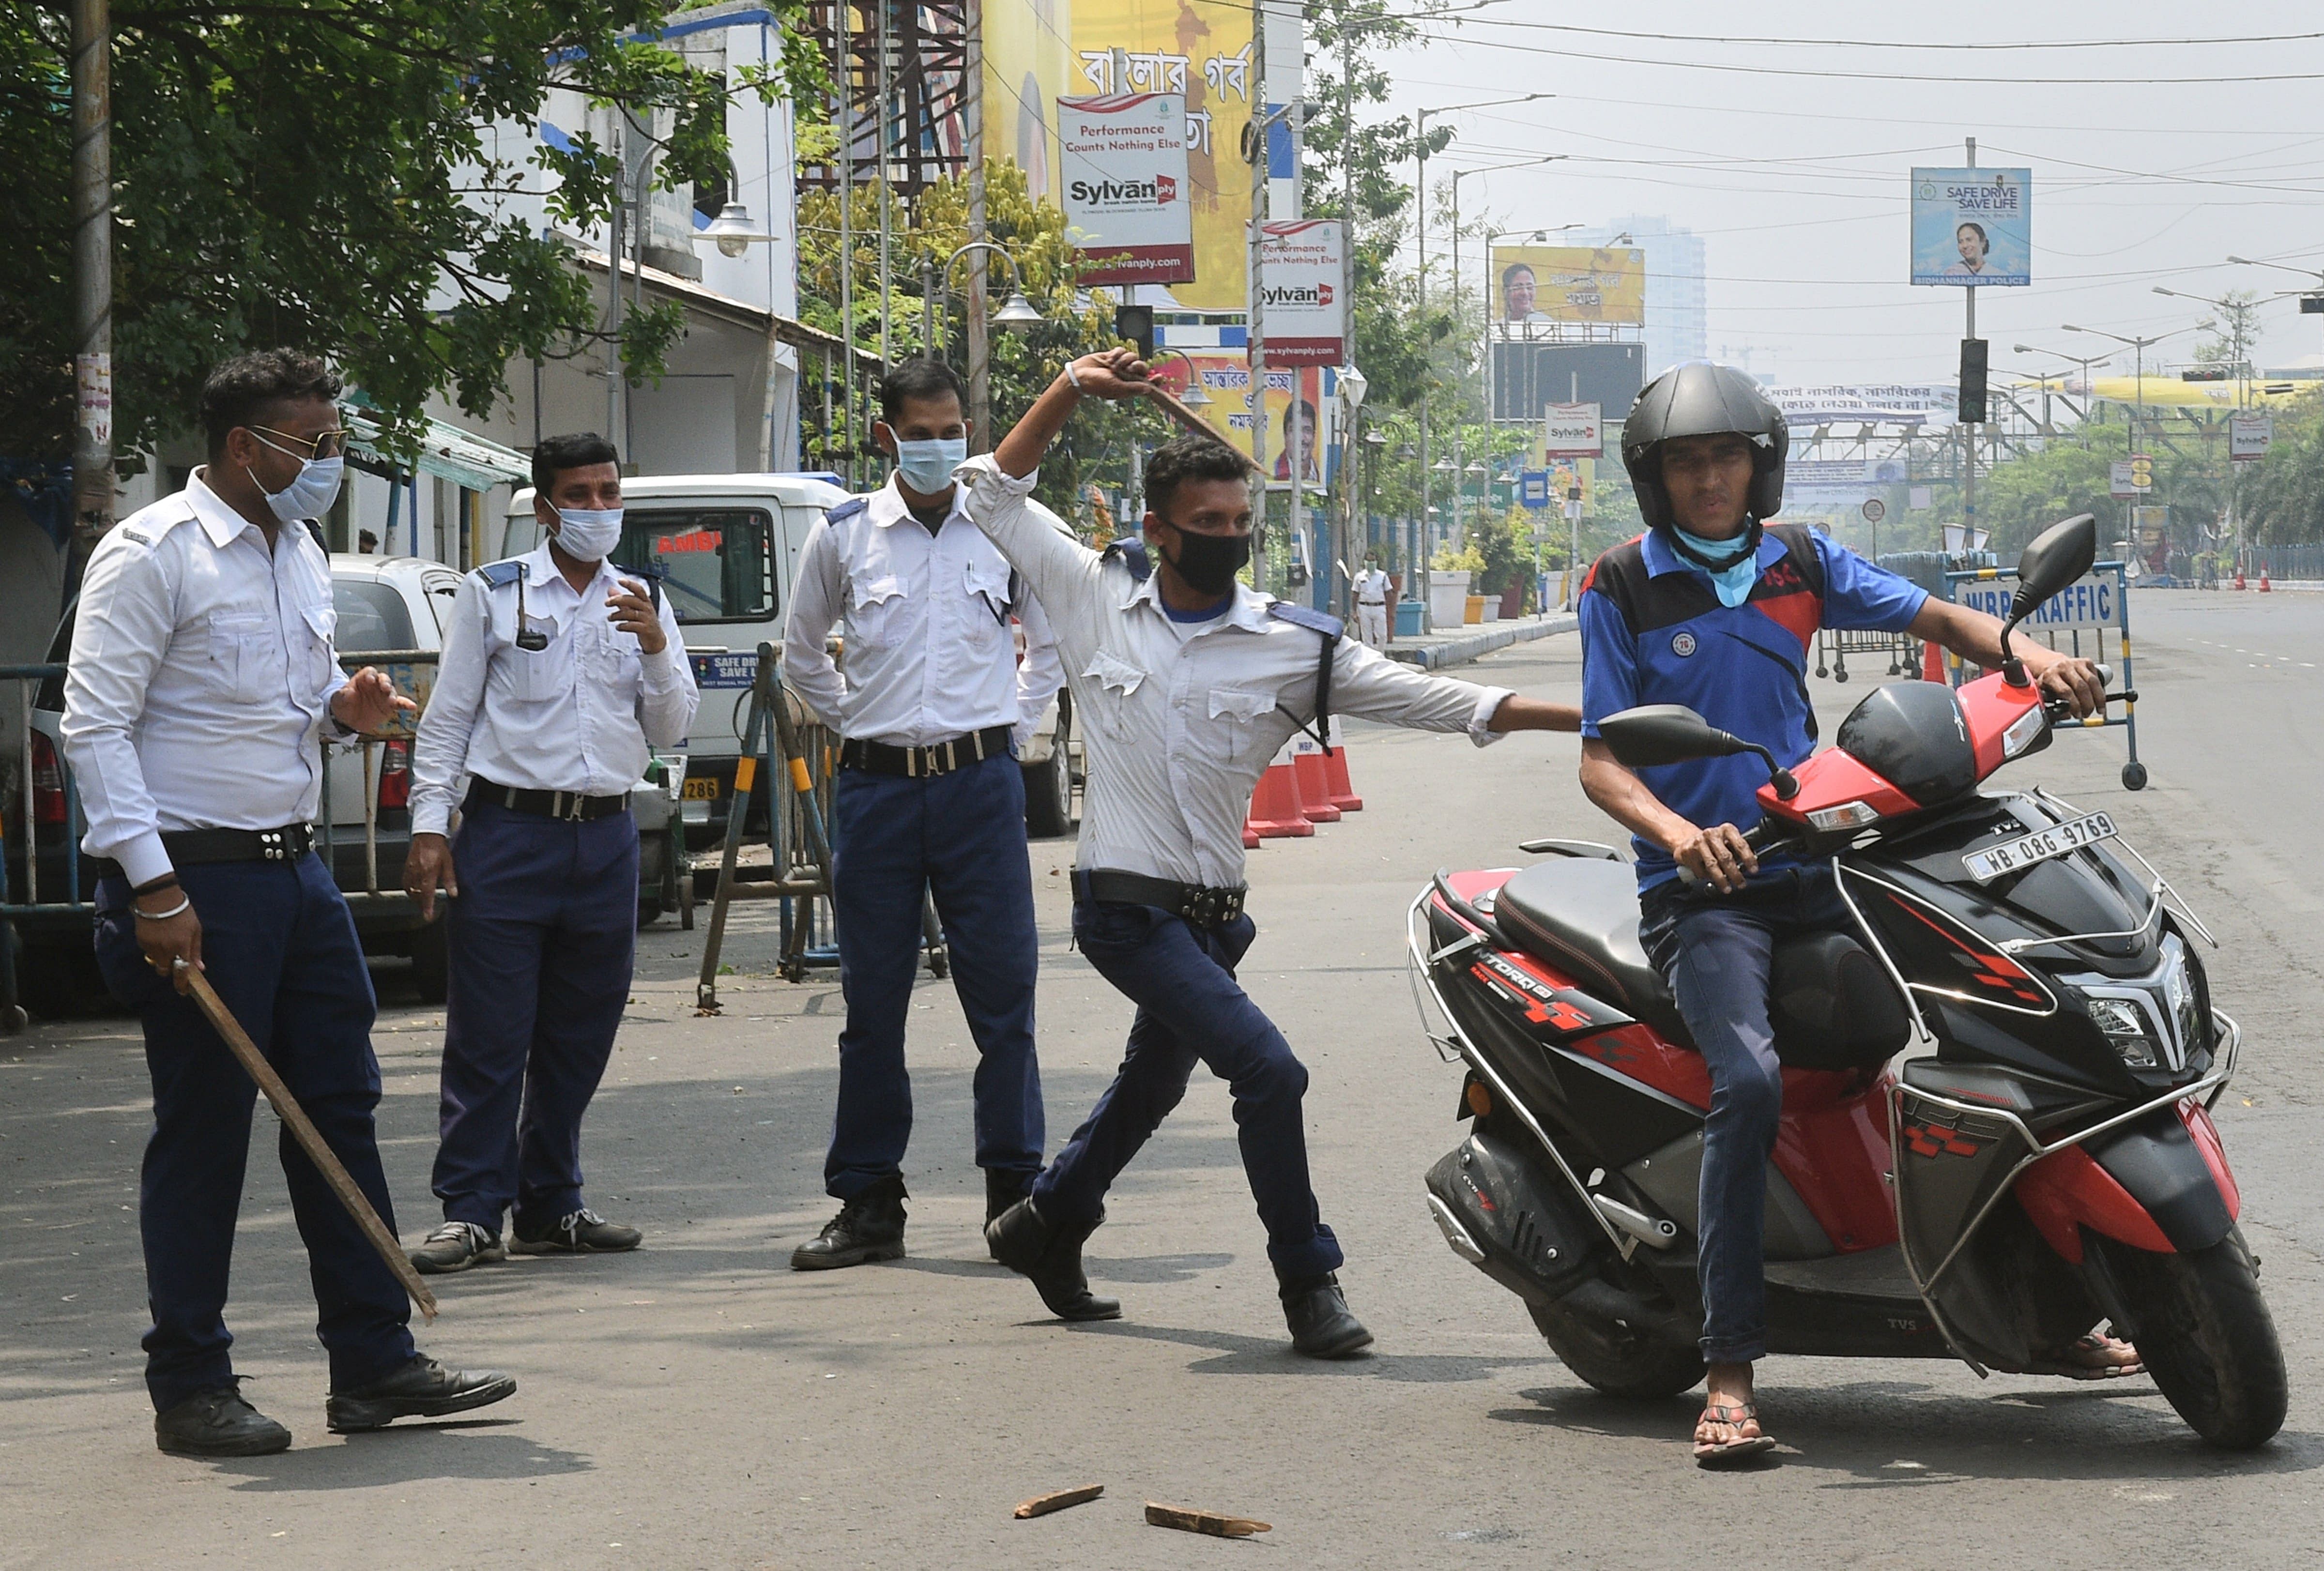 Of the 980 apprehended, 284 people were from the central division, 166 from the south division and 112 from the eastern suburban division. (Credit: PTI Photo)